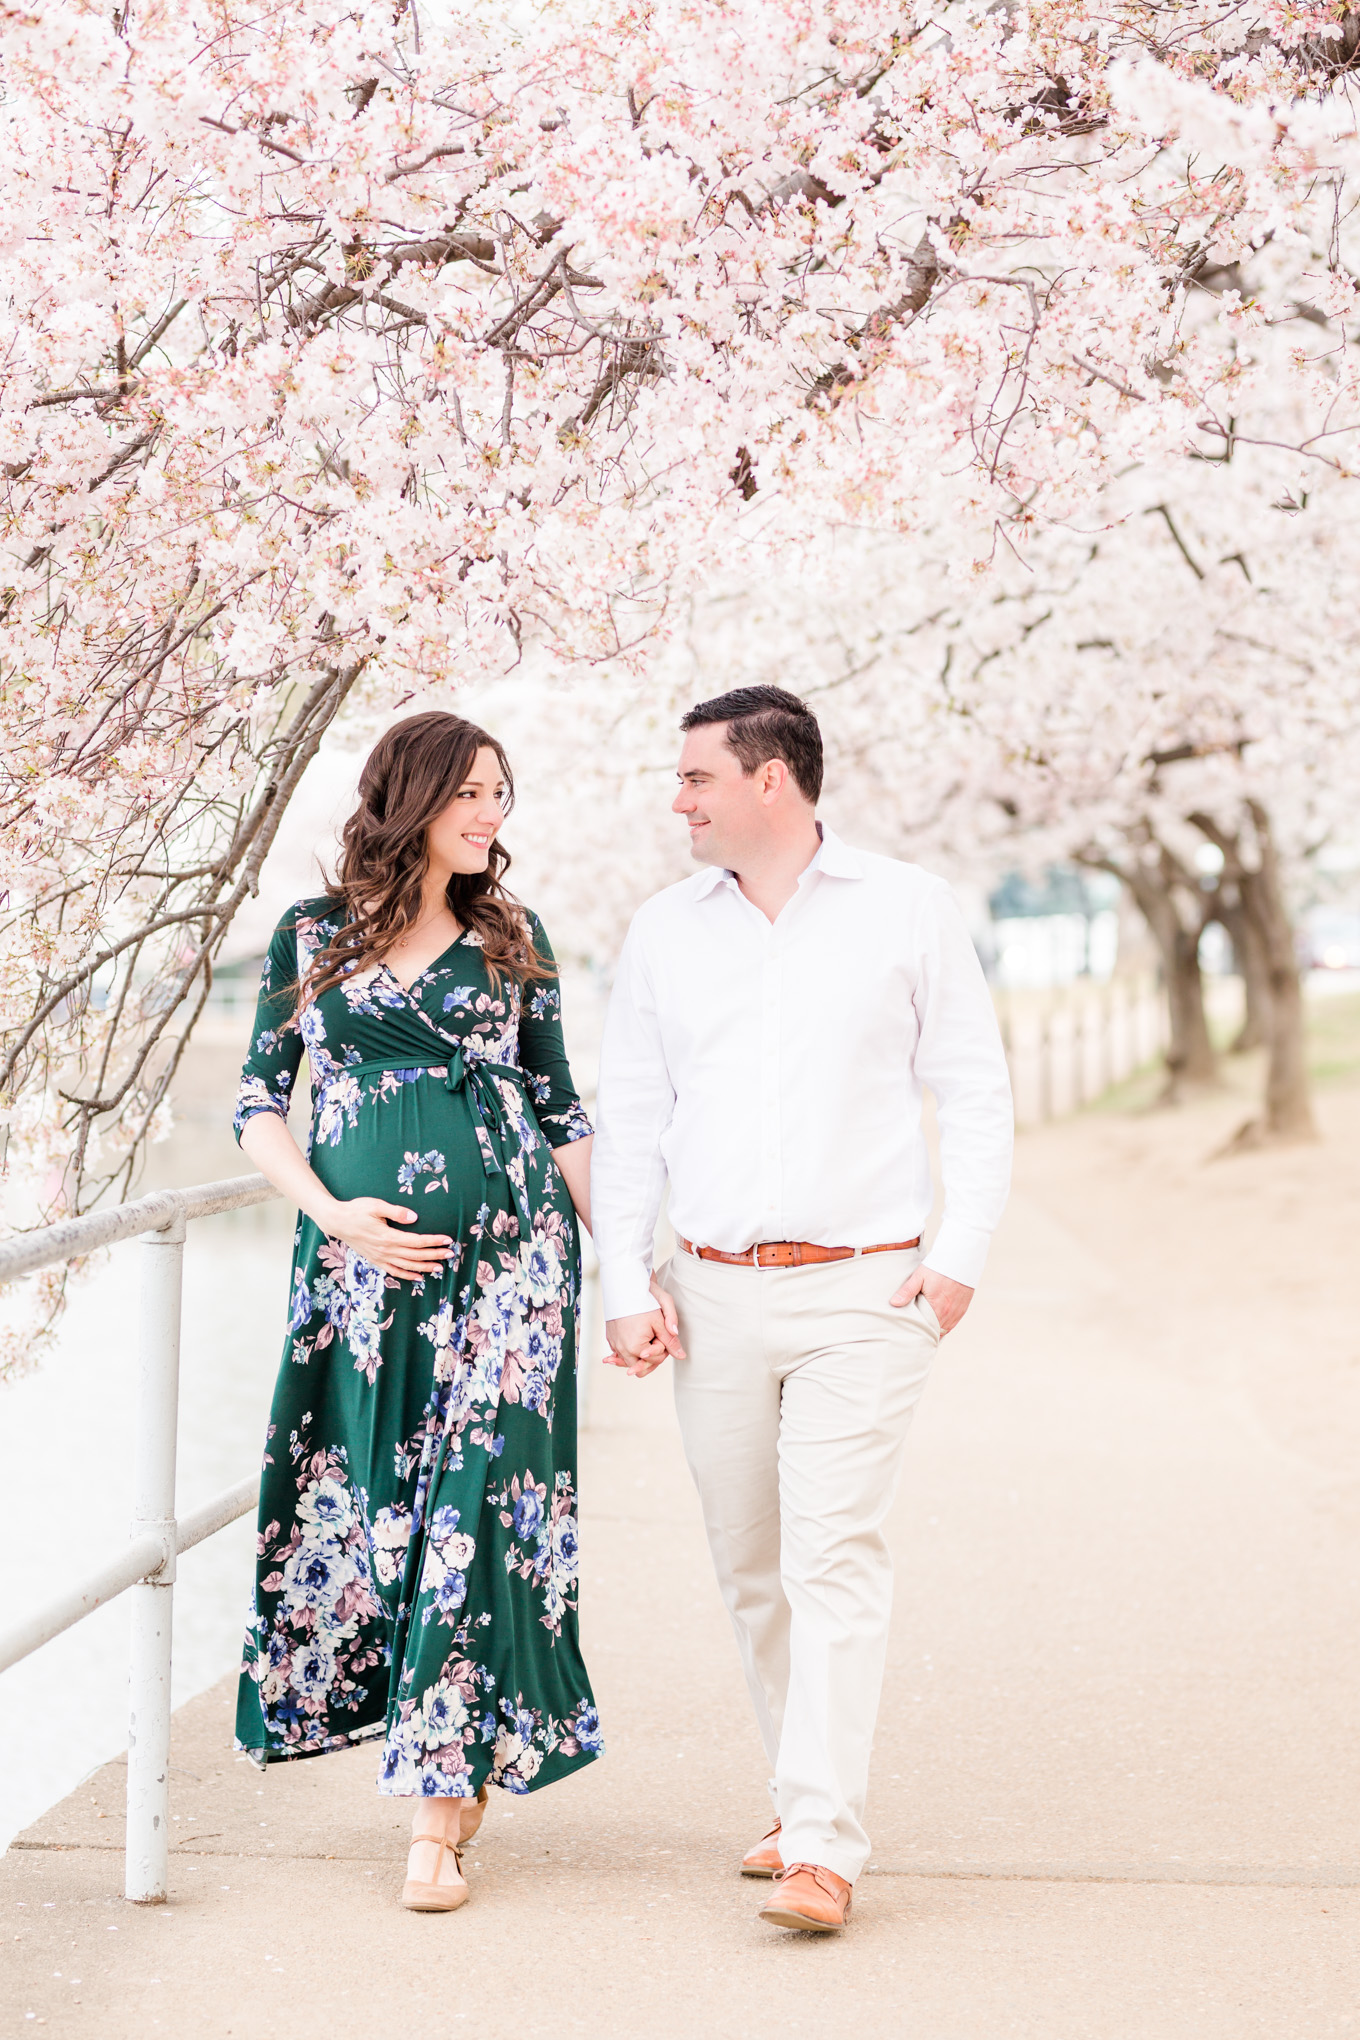 D.C. cherry blossoms photographer, D.C. cherry blossoms maternity session, maternity portraits, maternity photos, D.C. cherry blossoms, cherry blossoms maternity photo, floral print dress, brunette expectant mom, expecting mother, brunette woman, pregnant woman, third trimester, baby bump, couple snuggling, cute couple, cherry blossom trees, couple walking, hands on baby bump